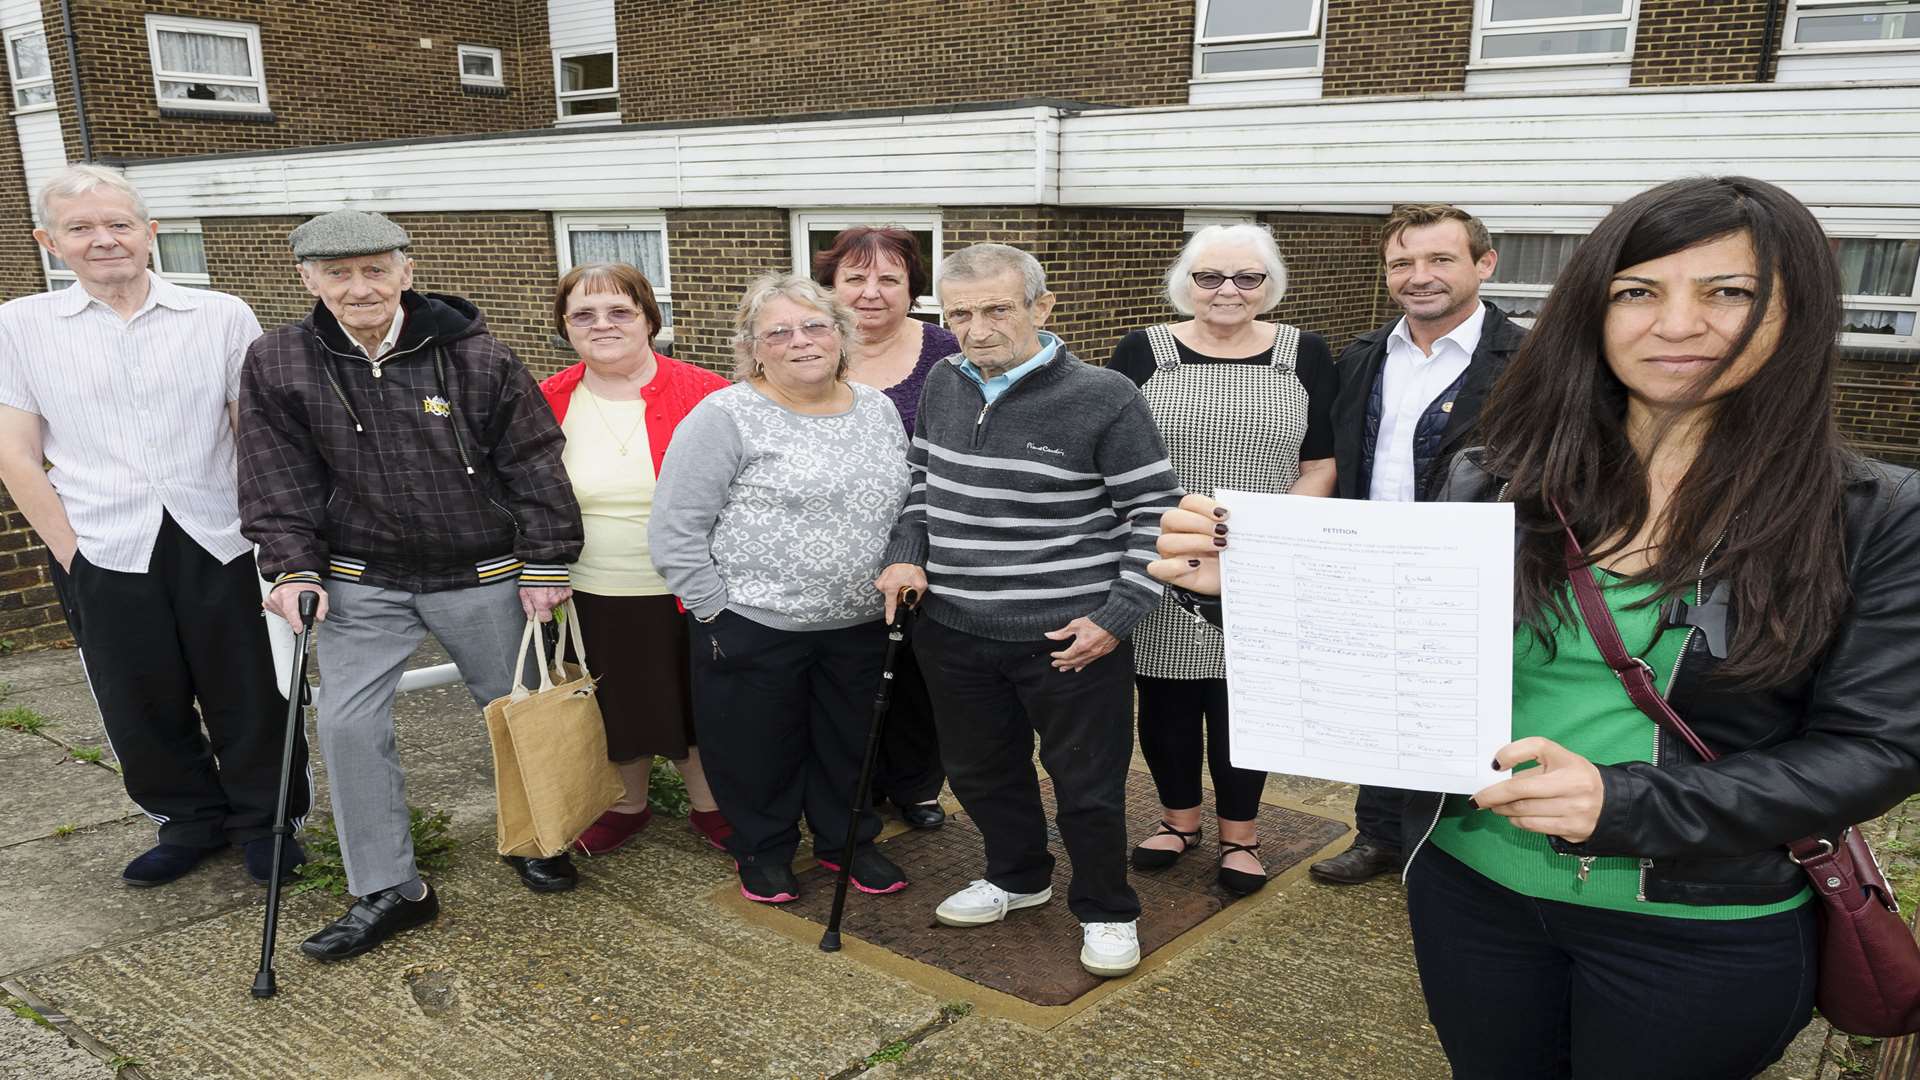 Petition organiser Pakize Guvenc, front, with Peter Scollard, right and residents of Cleveland House.